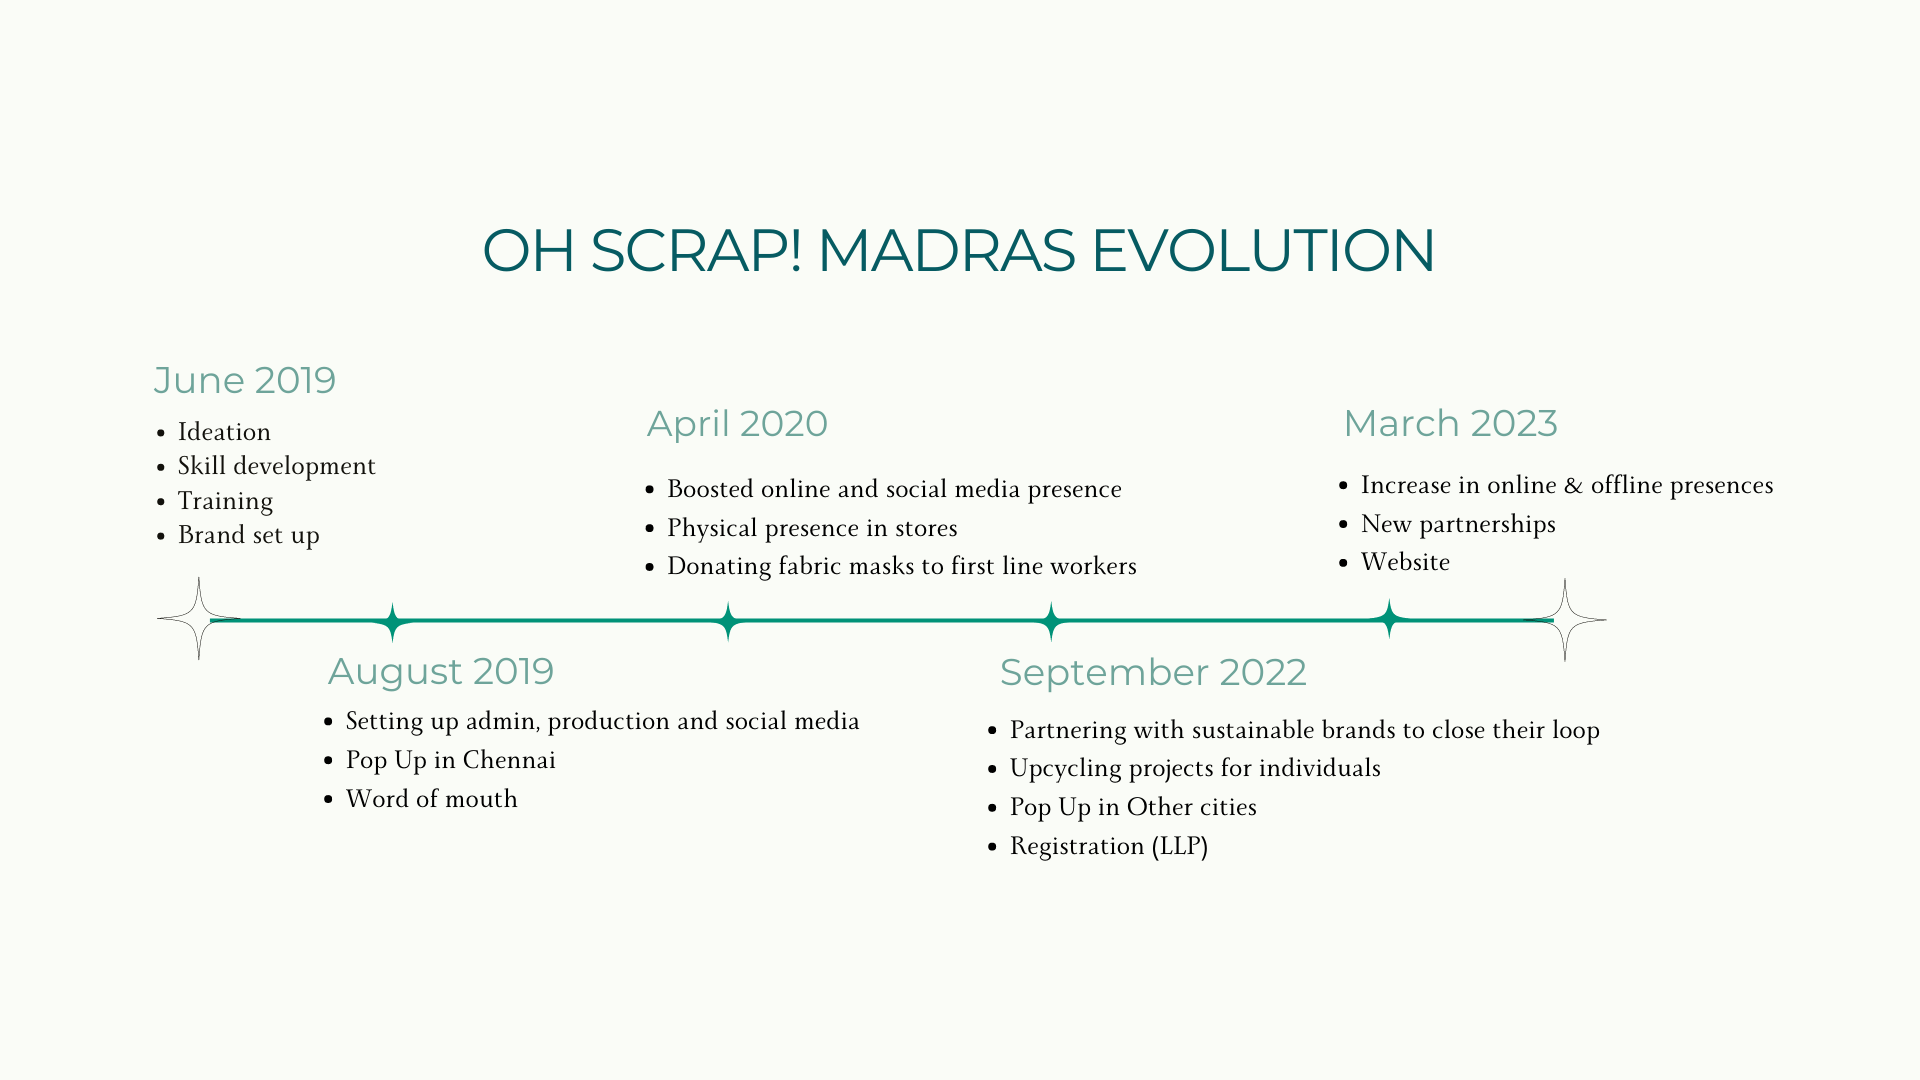 Oh Scrap Madras' evolution timeline from 2019 to present 